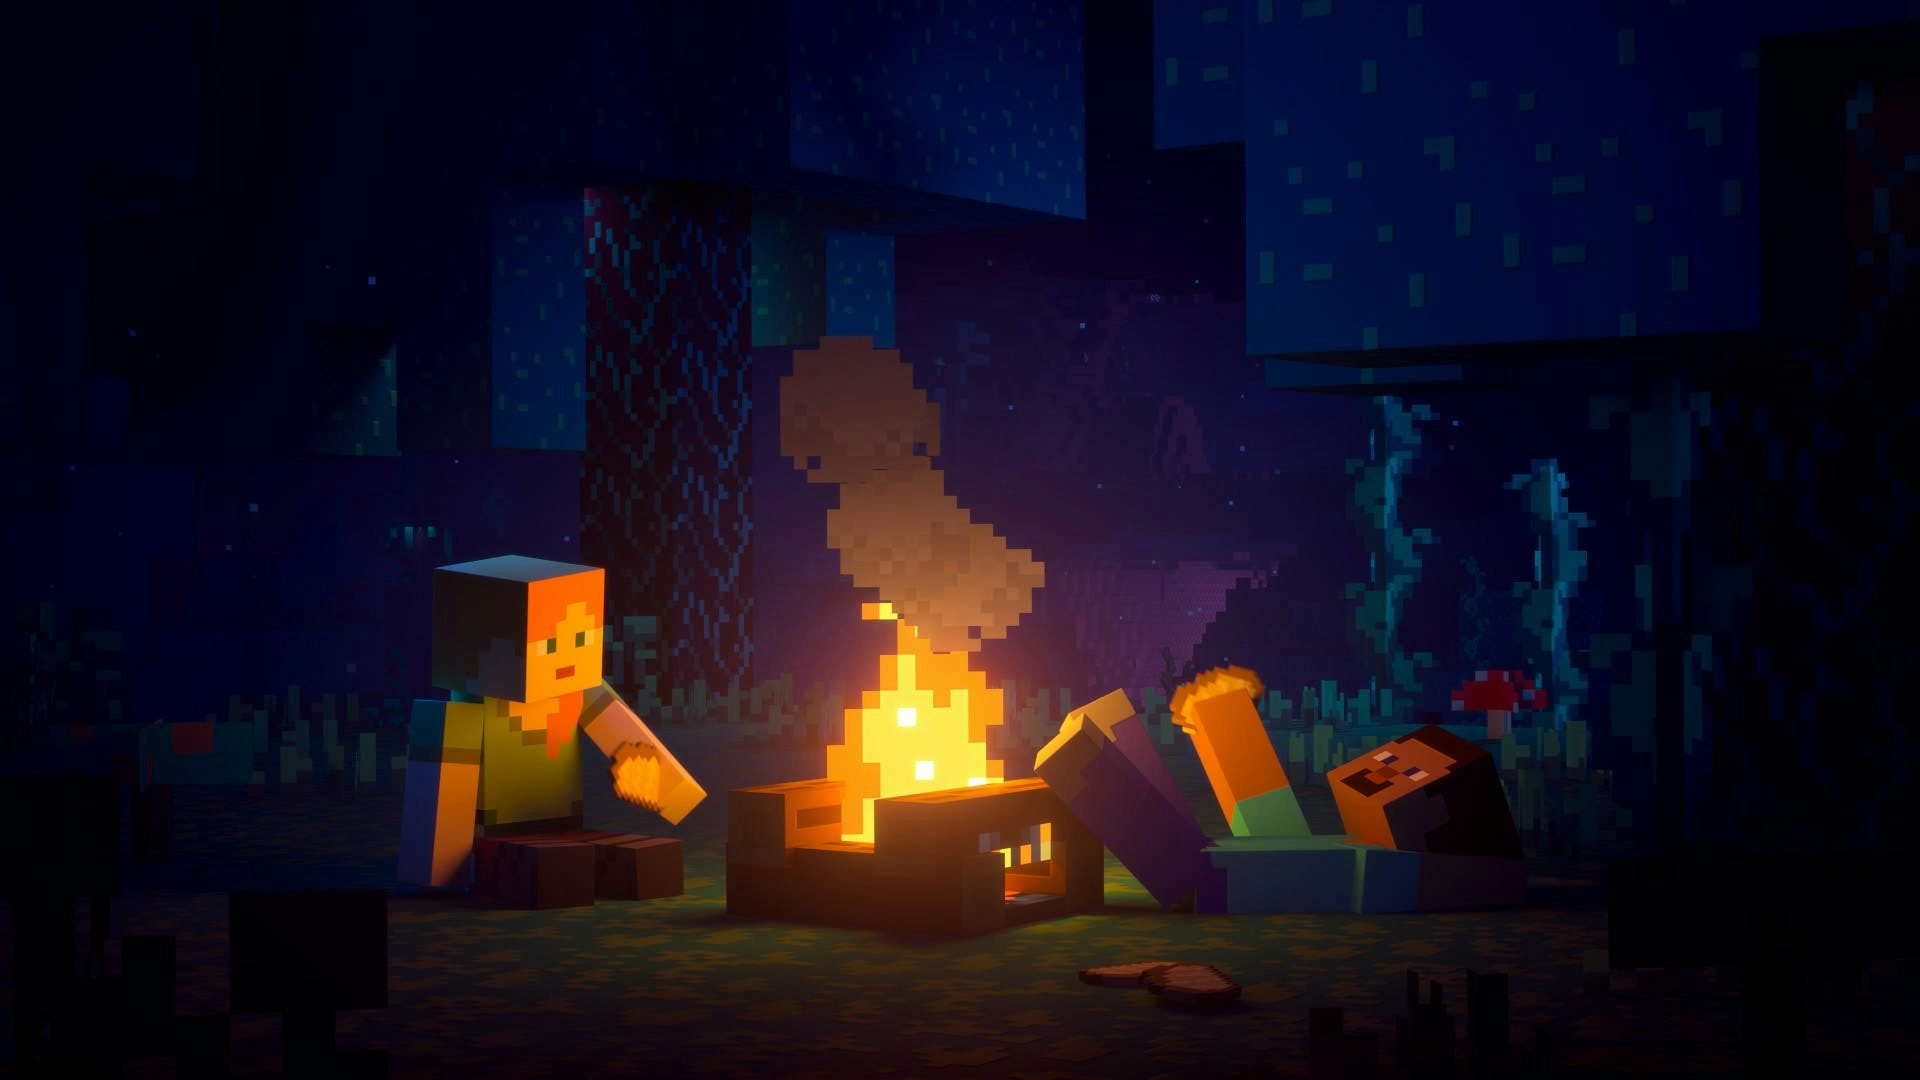 Steve and Alex are grilling meat at a campfire in the Nether